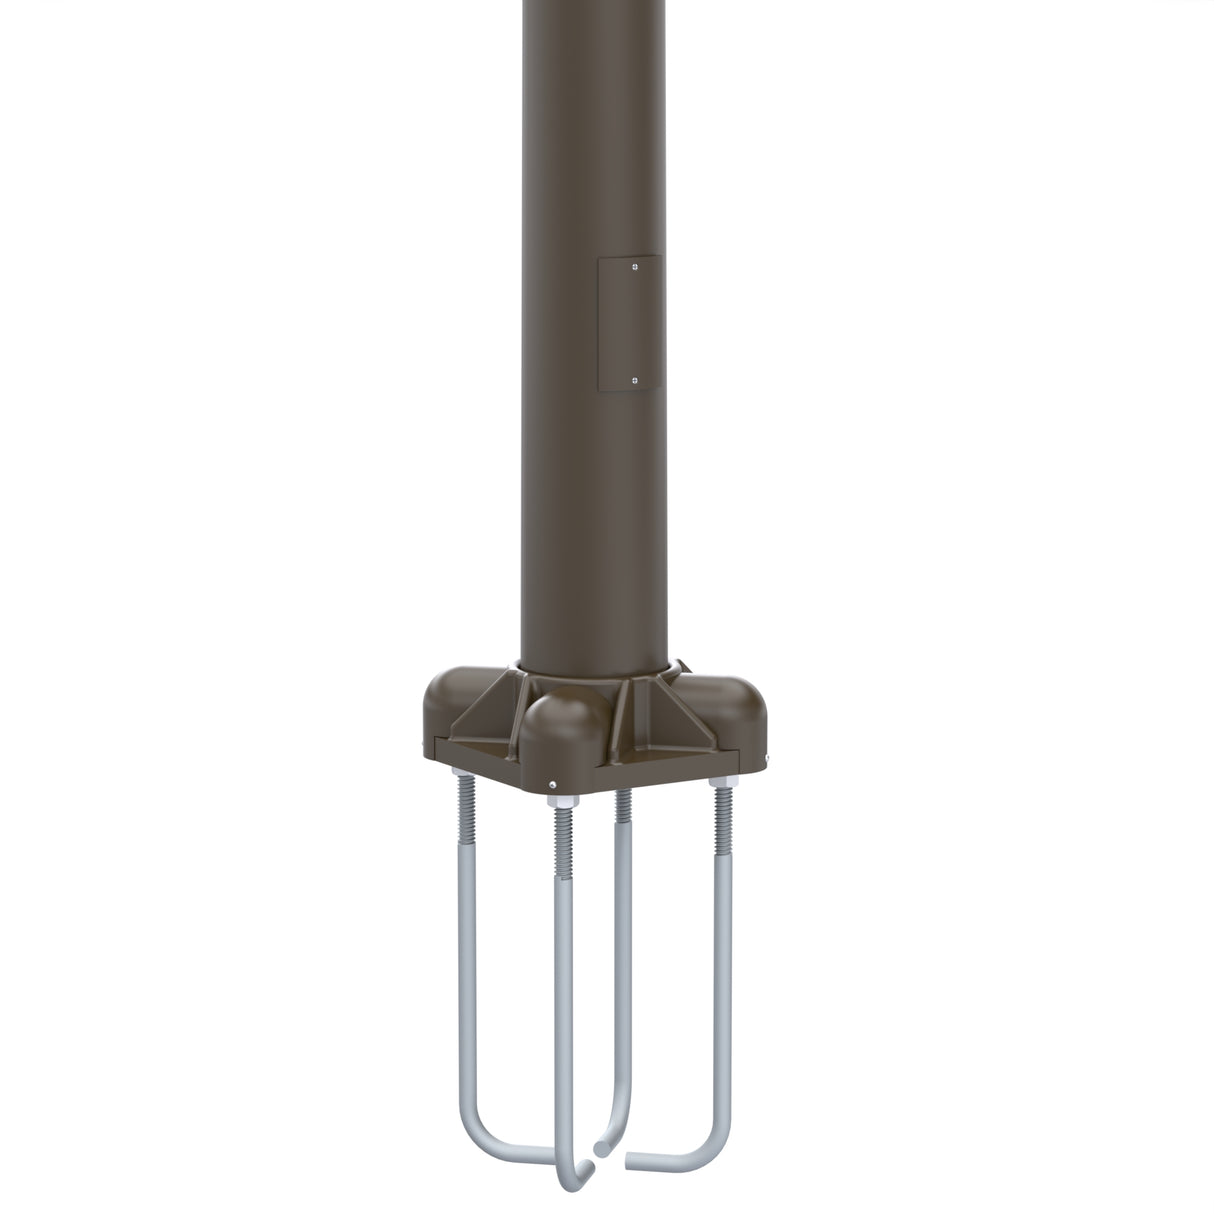 10' Tall x 5.0" Base OD x 3.0" Top OD x 0.125" Thick, Round Tapered Aluminum, Anchor Base Light Pole